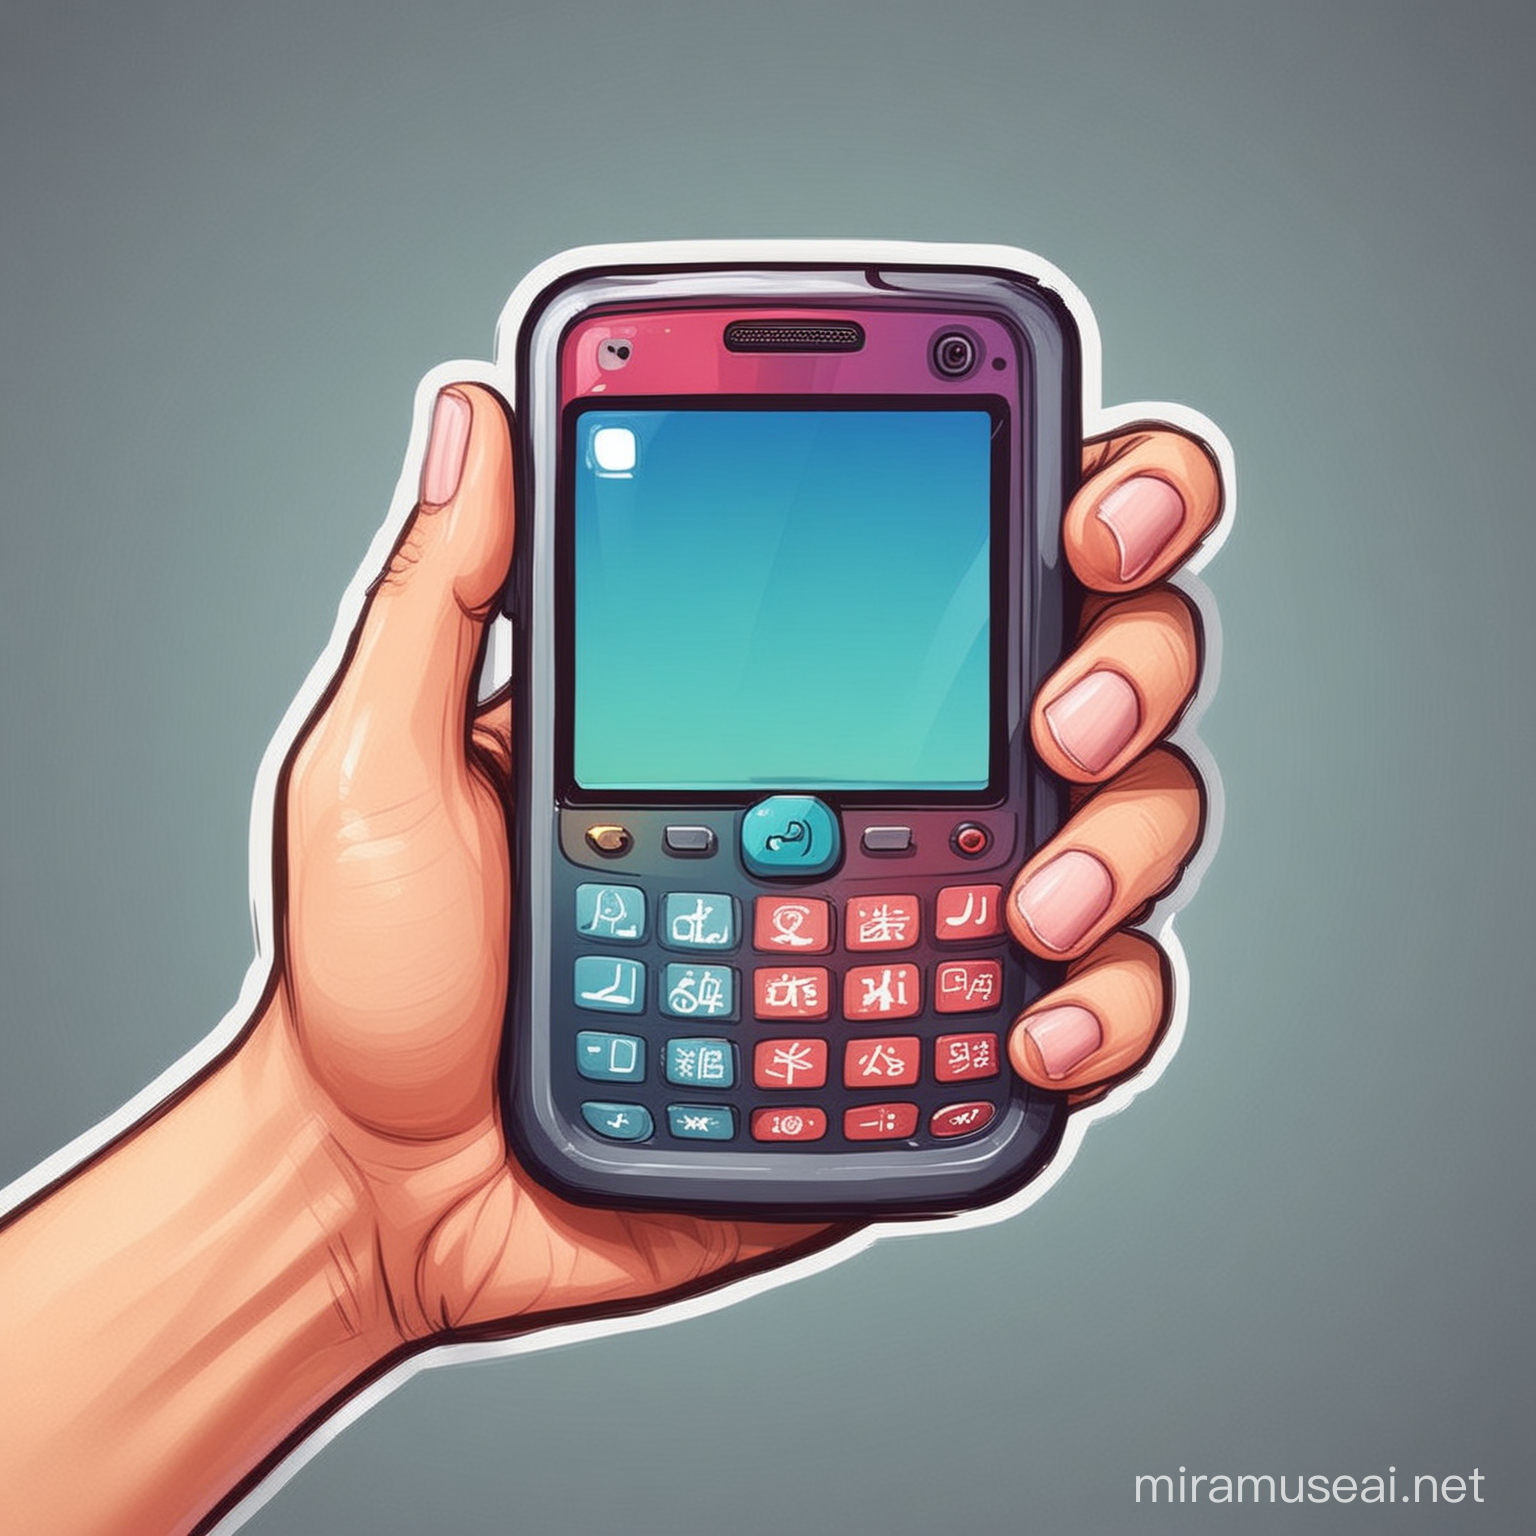 hand holding a handphone, cartoon sticker style, realistic style, vibrant colors